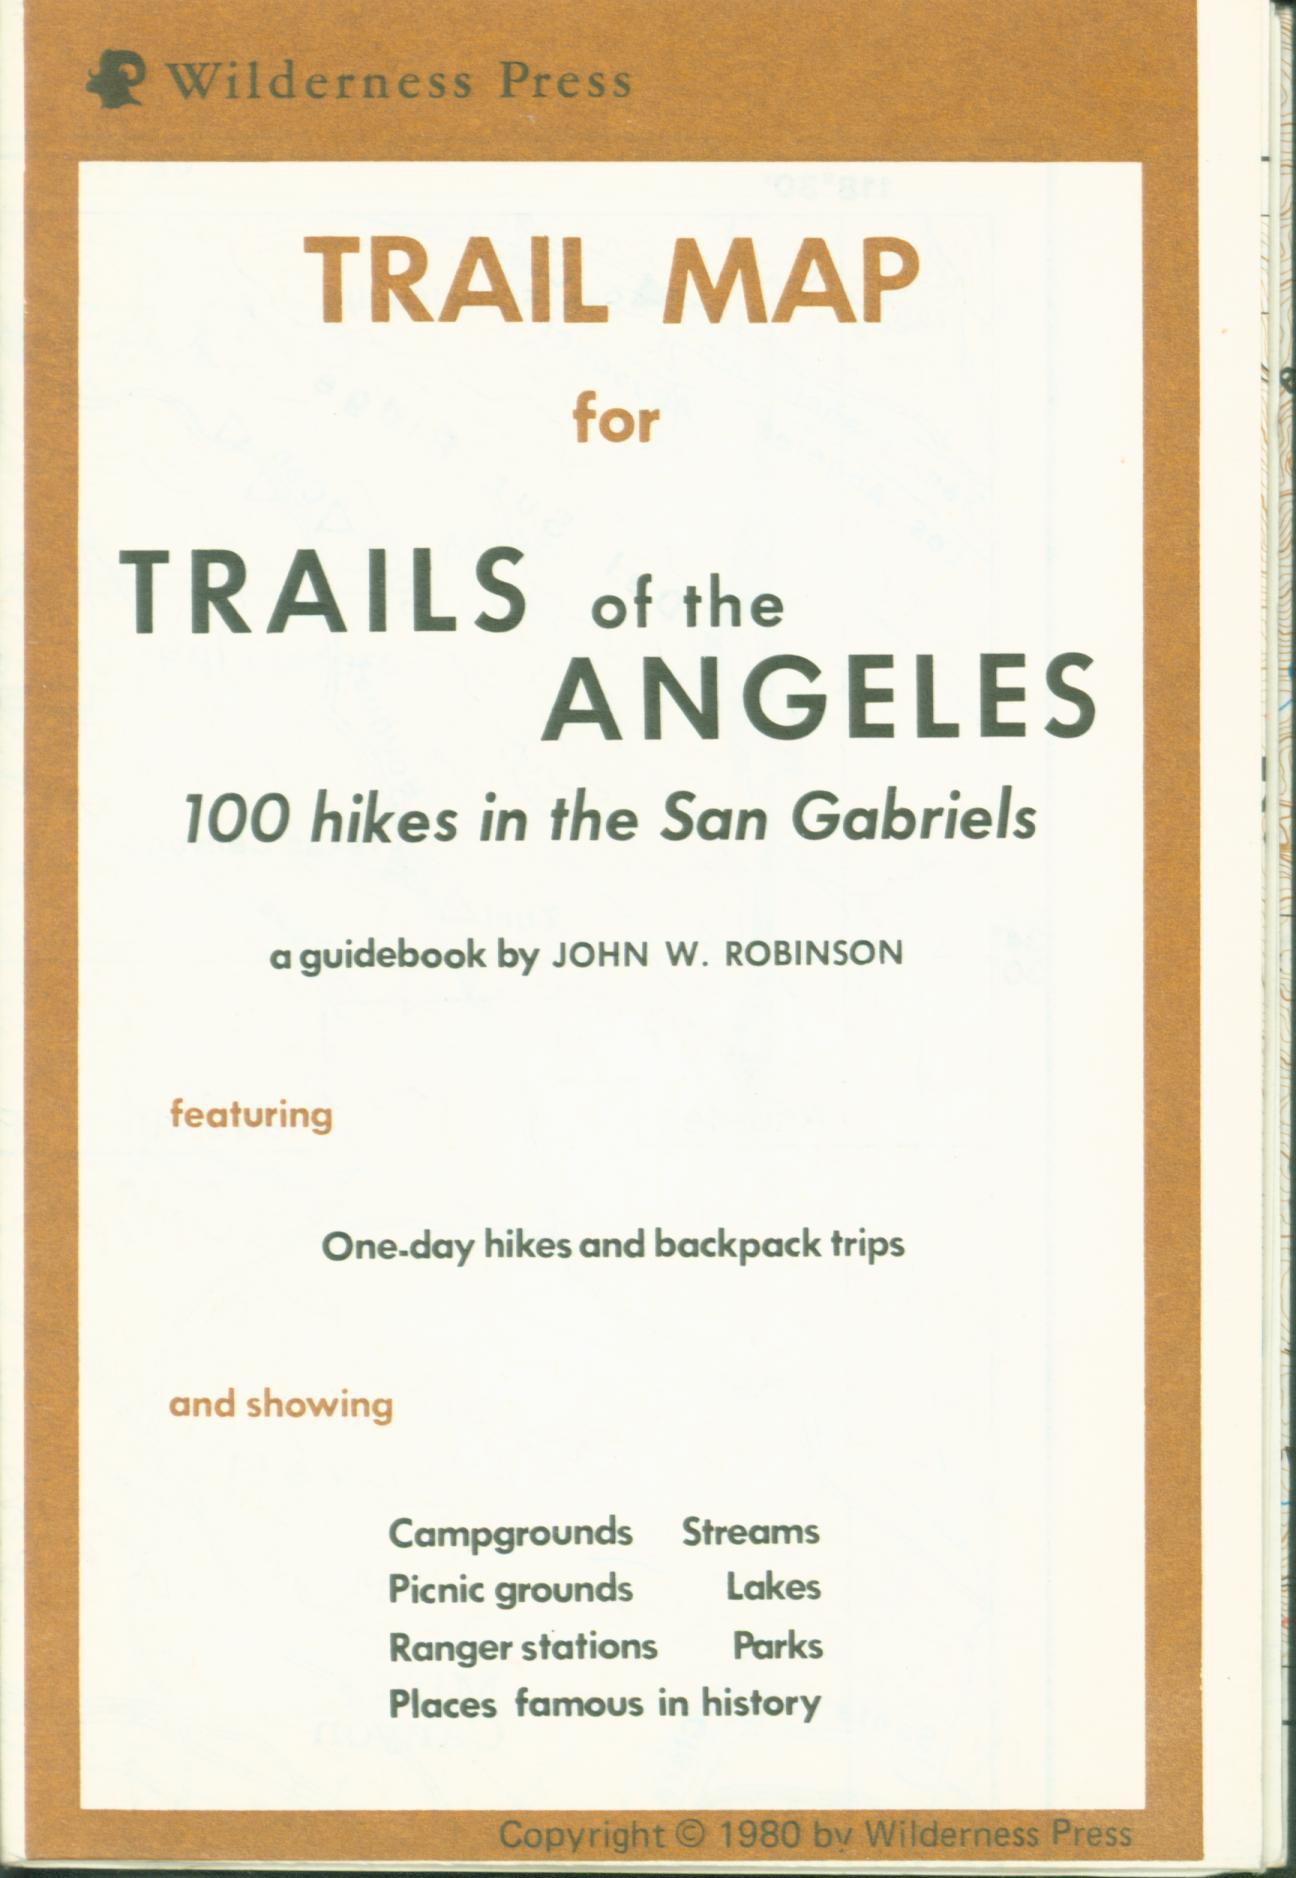 TRAILS OF THE ANGELES MAP (CA).